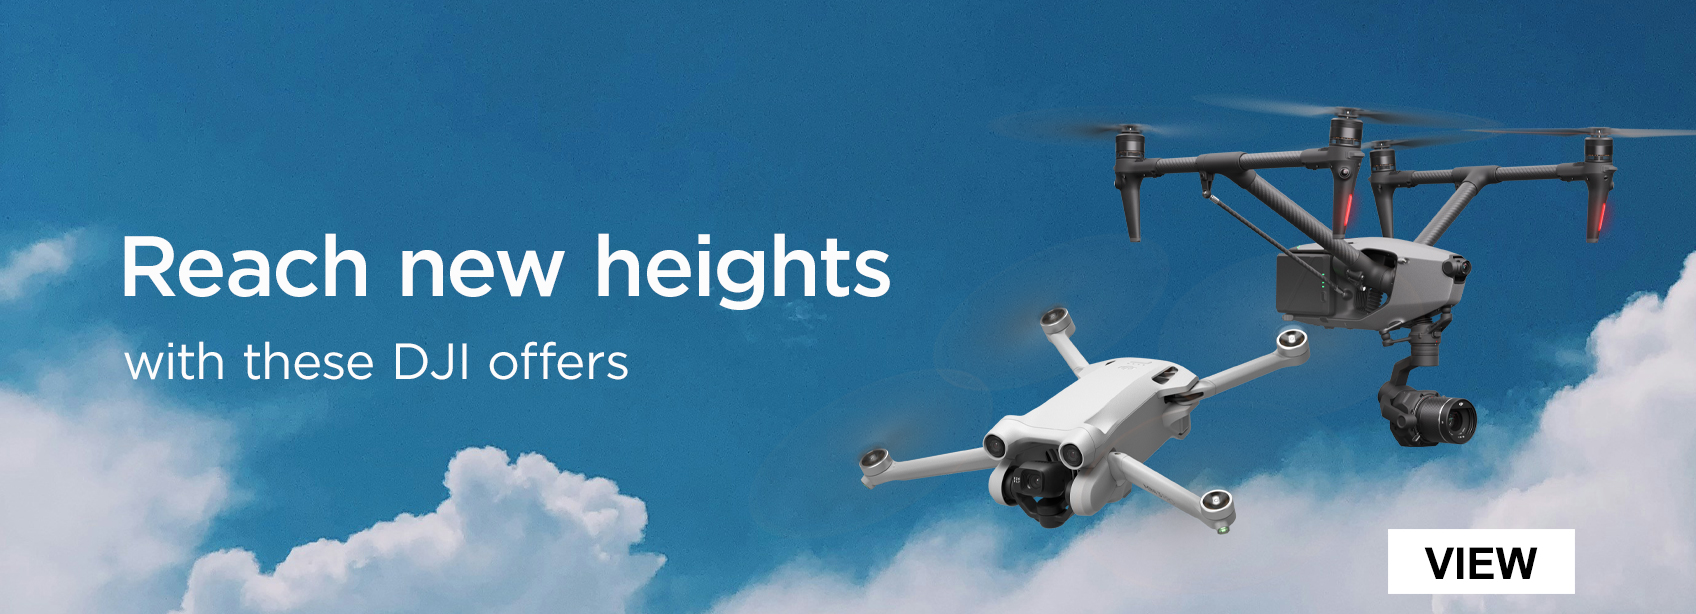 Reach new heights with these DJI offers